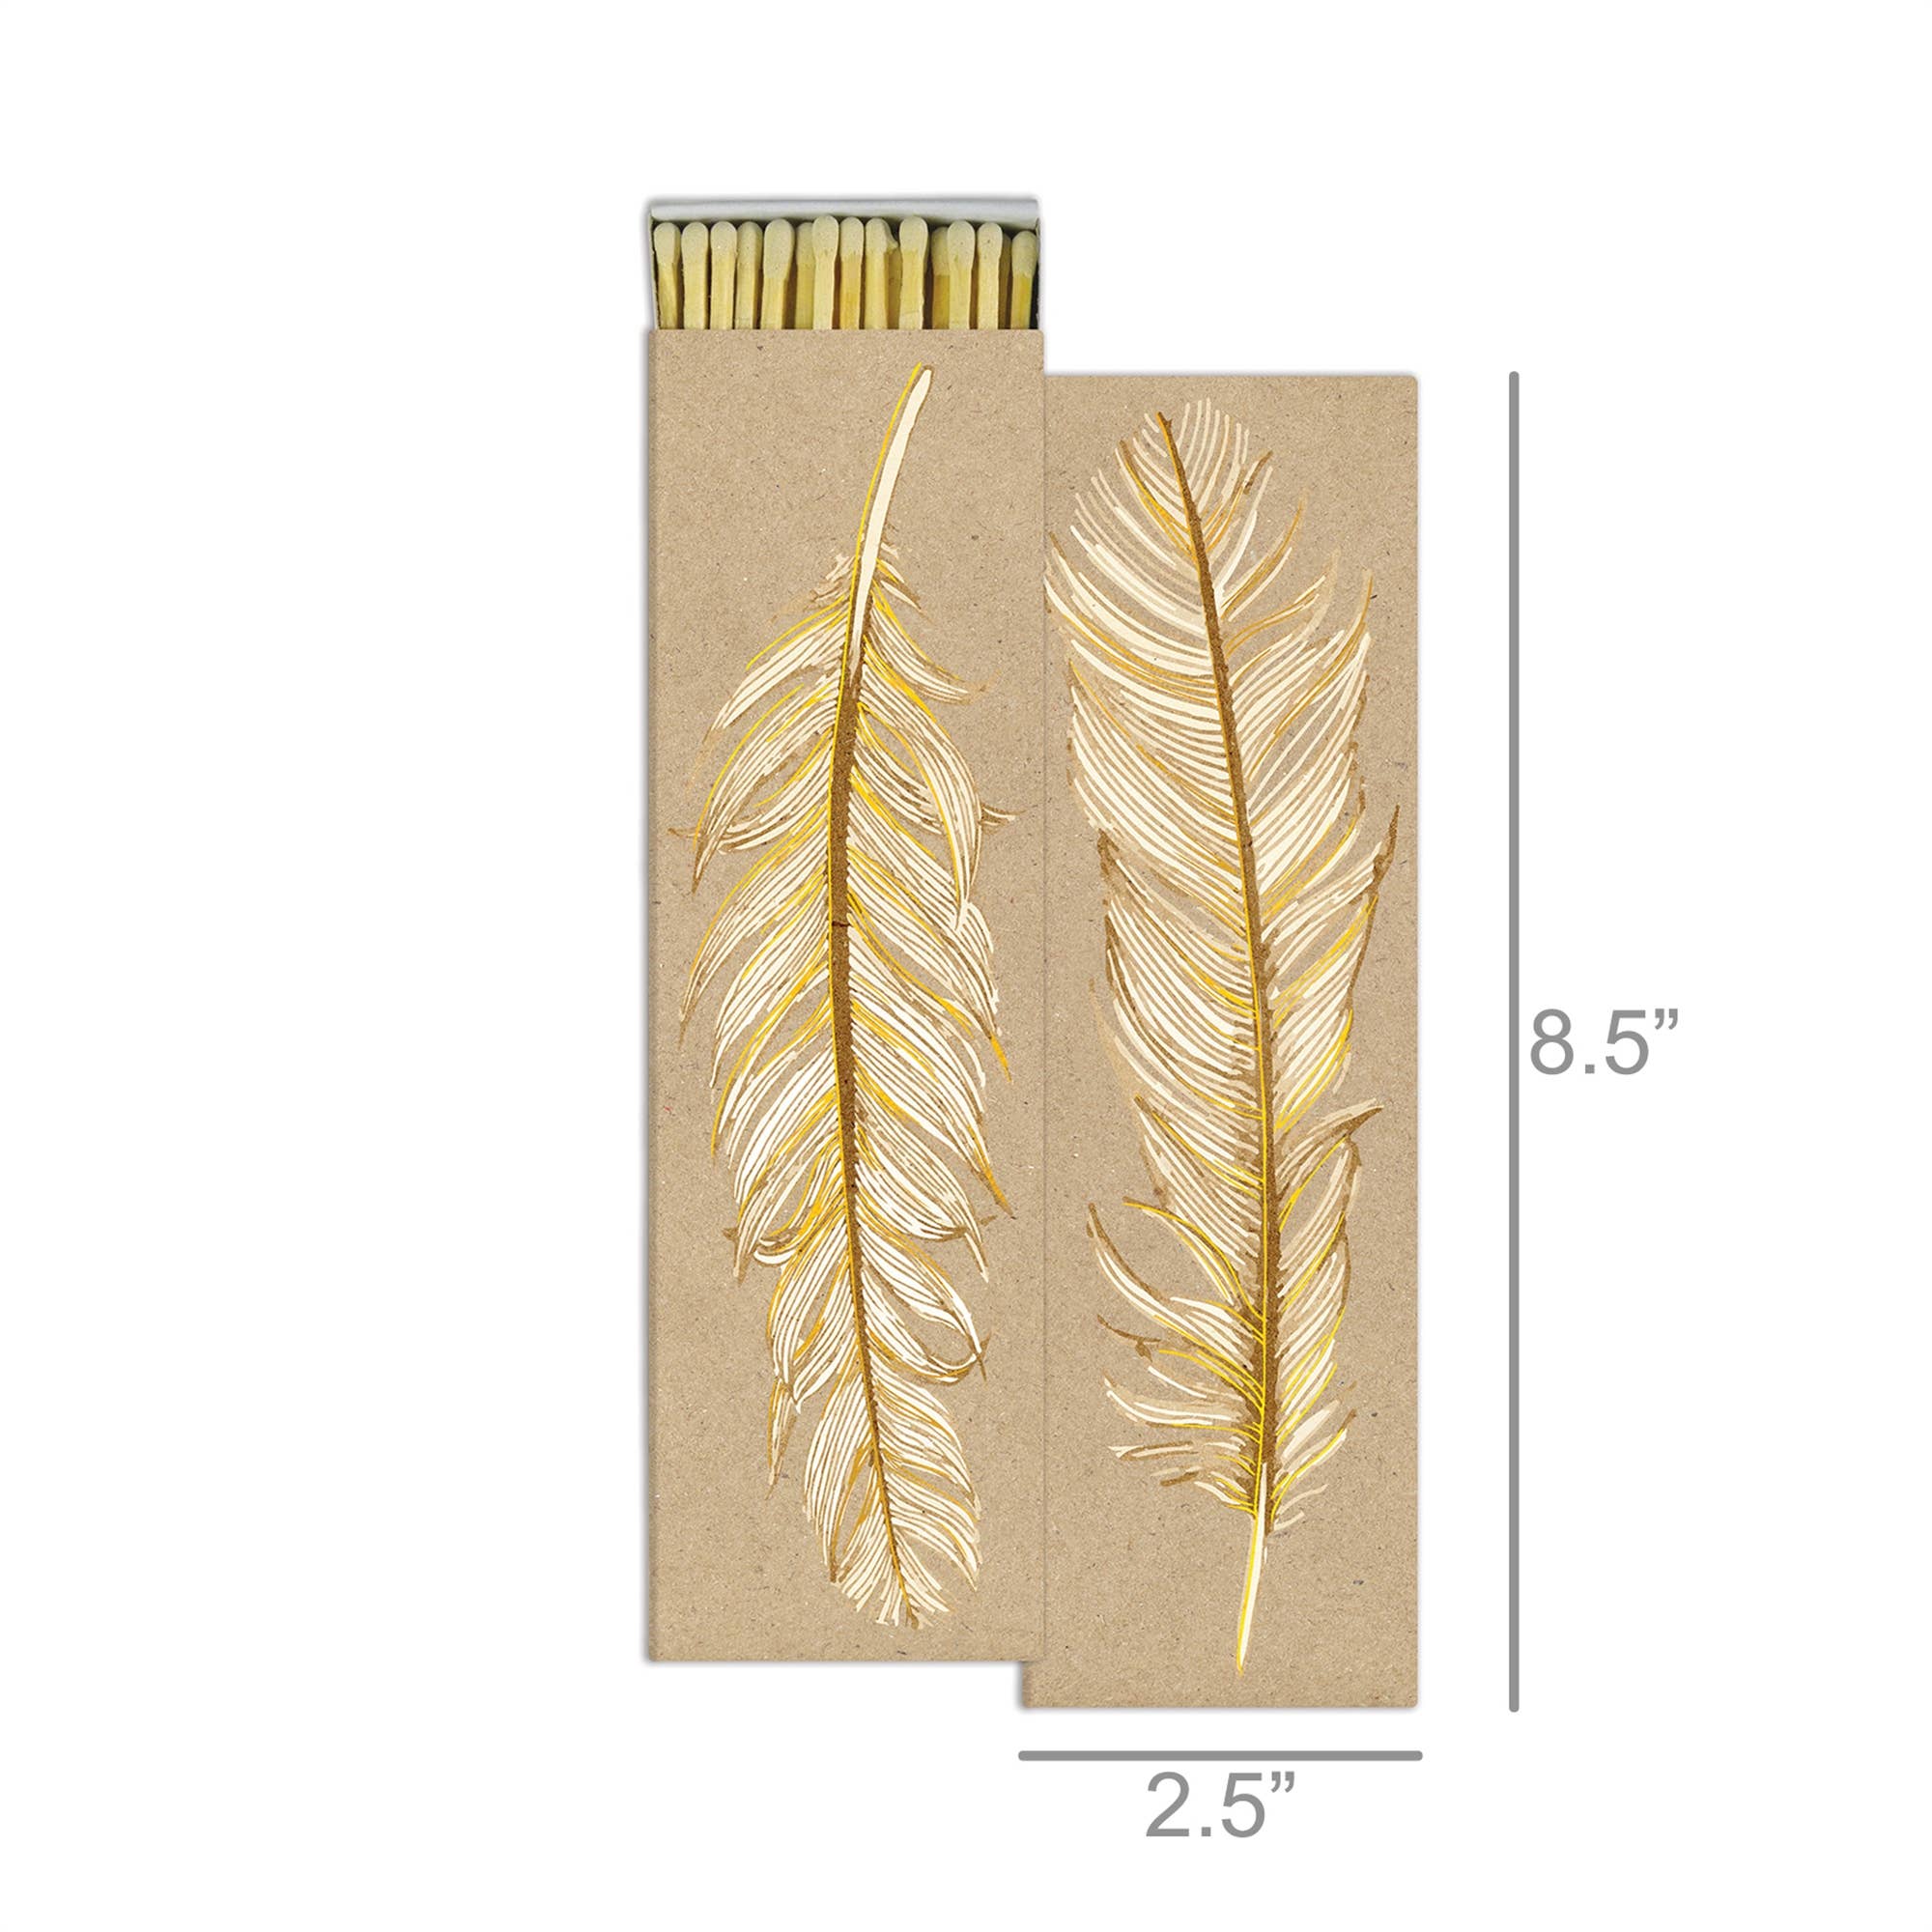 Ruffled Feather Long Matches - Matches